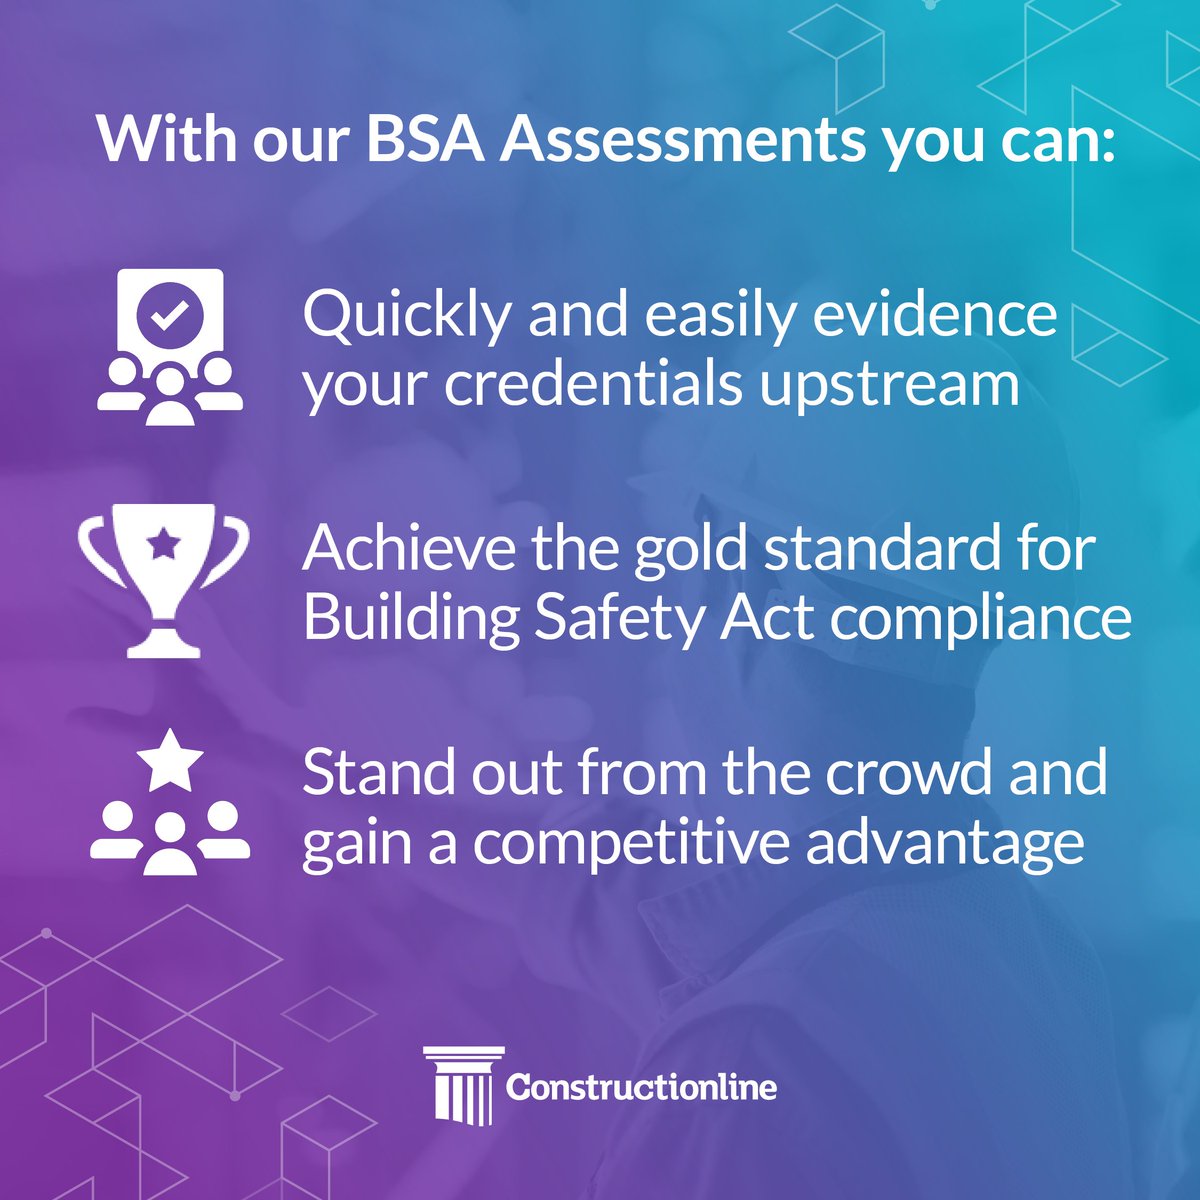 📢 We are offering our Gold and Platinum members early access from today! Find out more about the Building Safety Act and how Constructionline is helping you comply with our new BSA hub. It's full of useful content and resources! - ow.ly/qHb150RmlhP